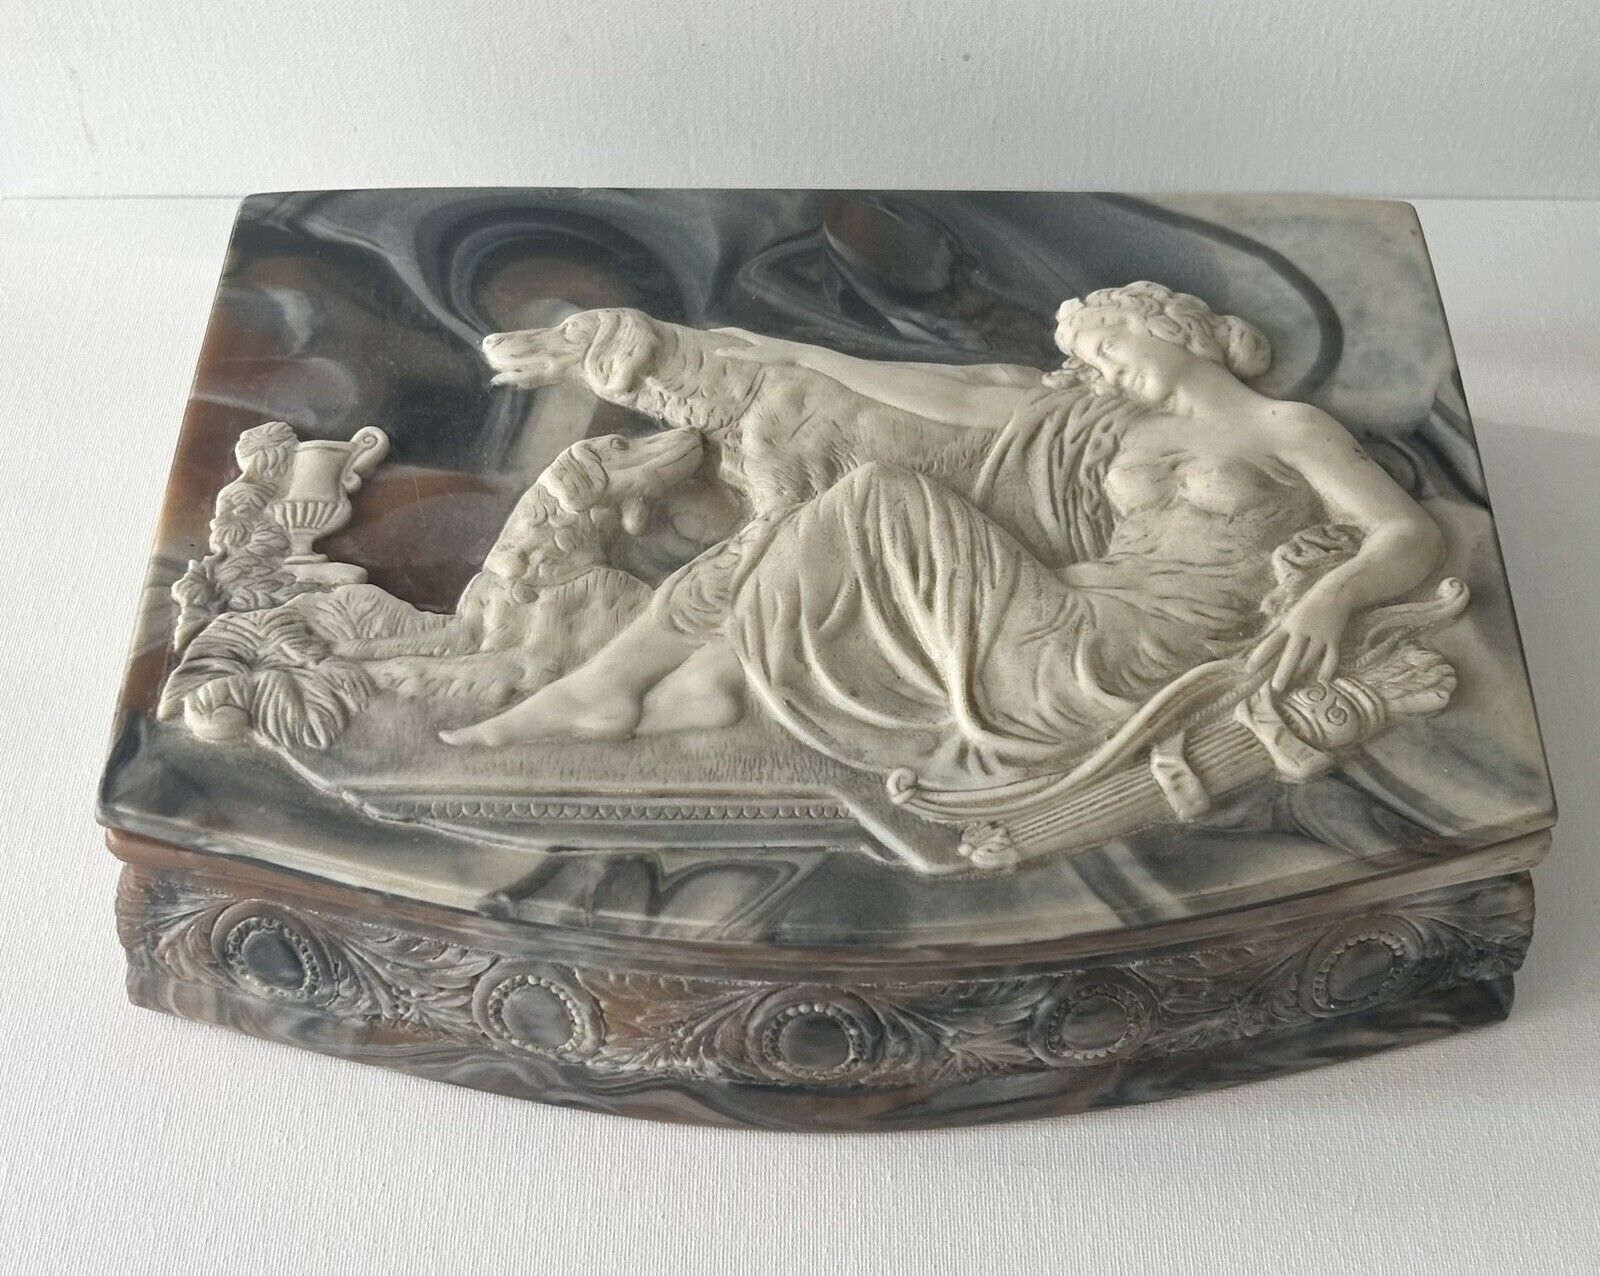 Genuine Incolay Stone Jewelry Trinket Box Victorian Art Nouveau Woman With Dogs